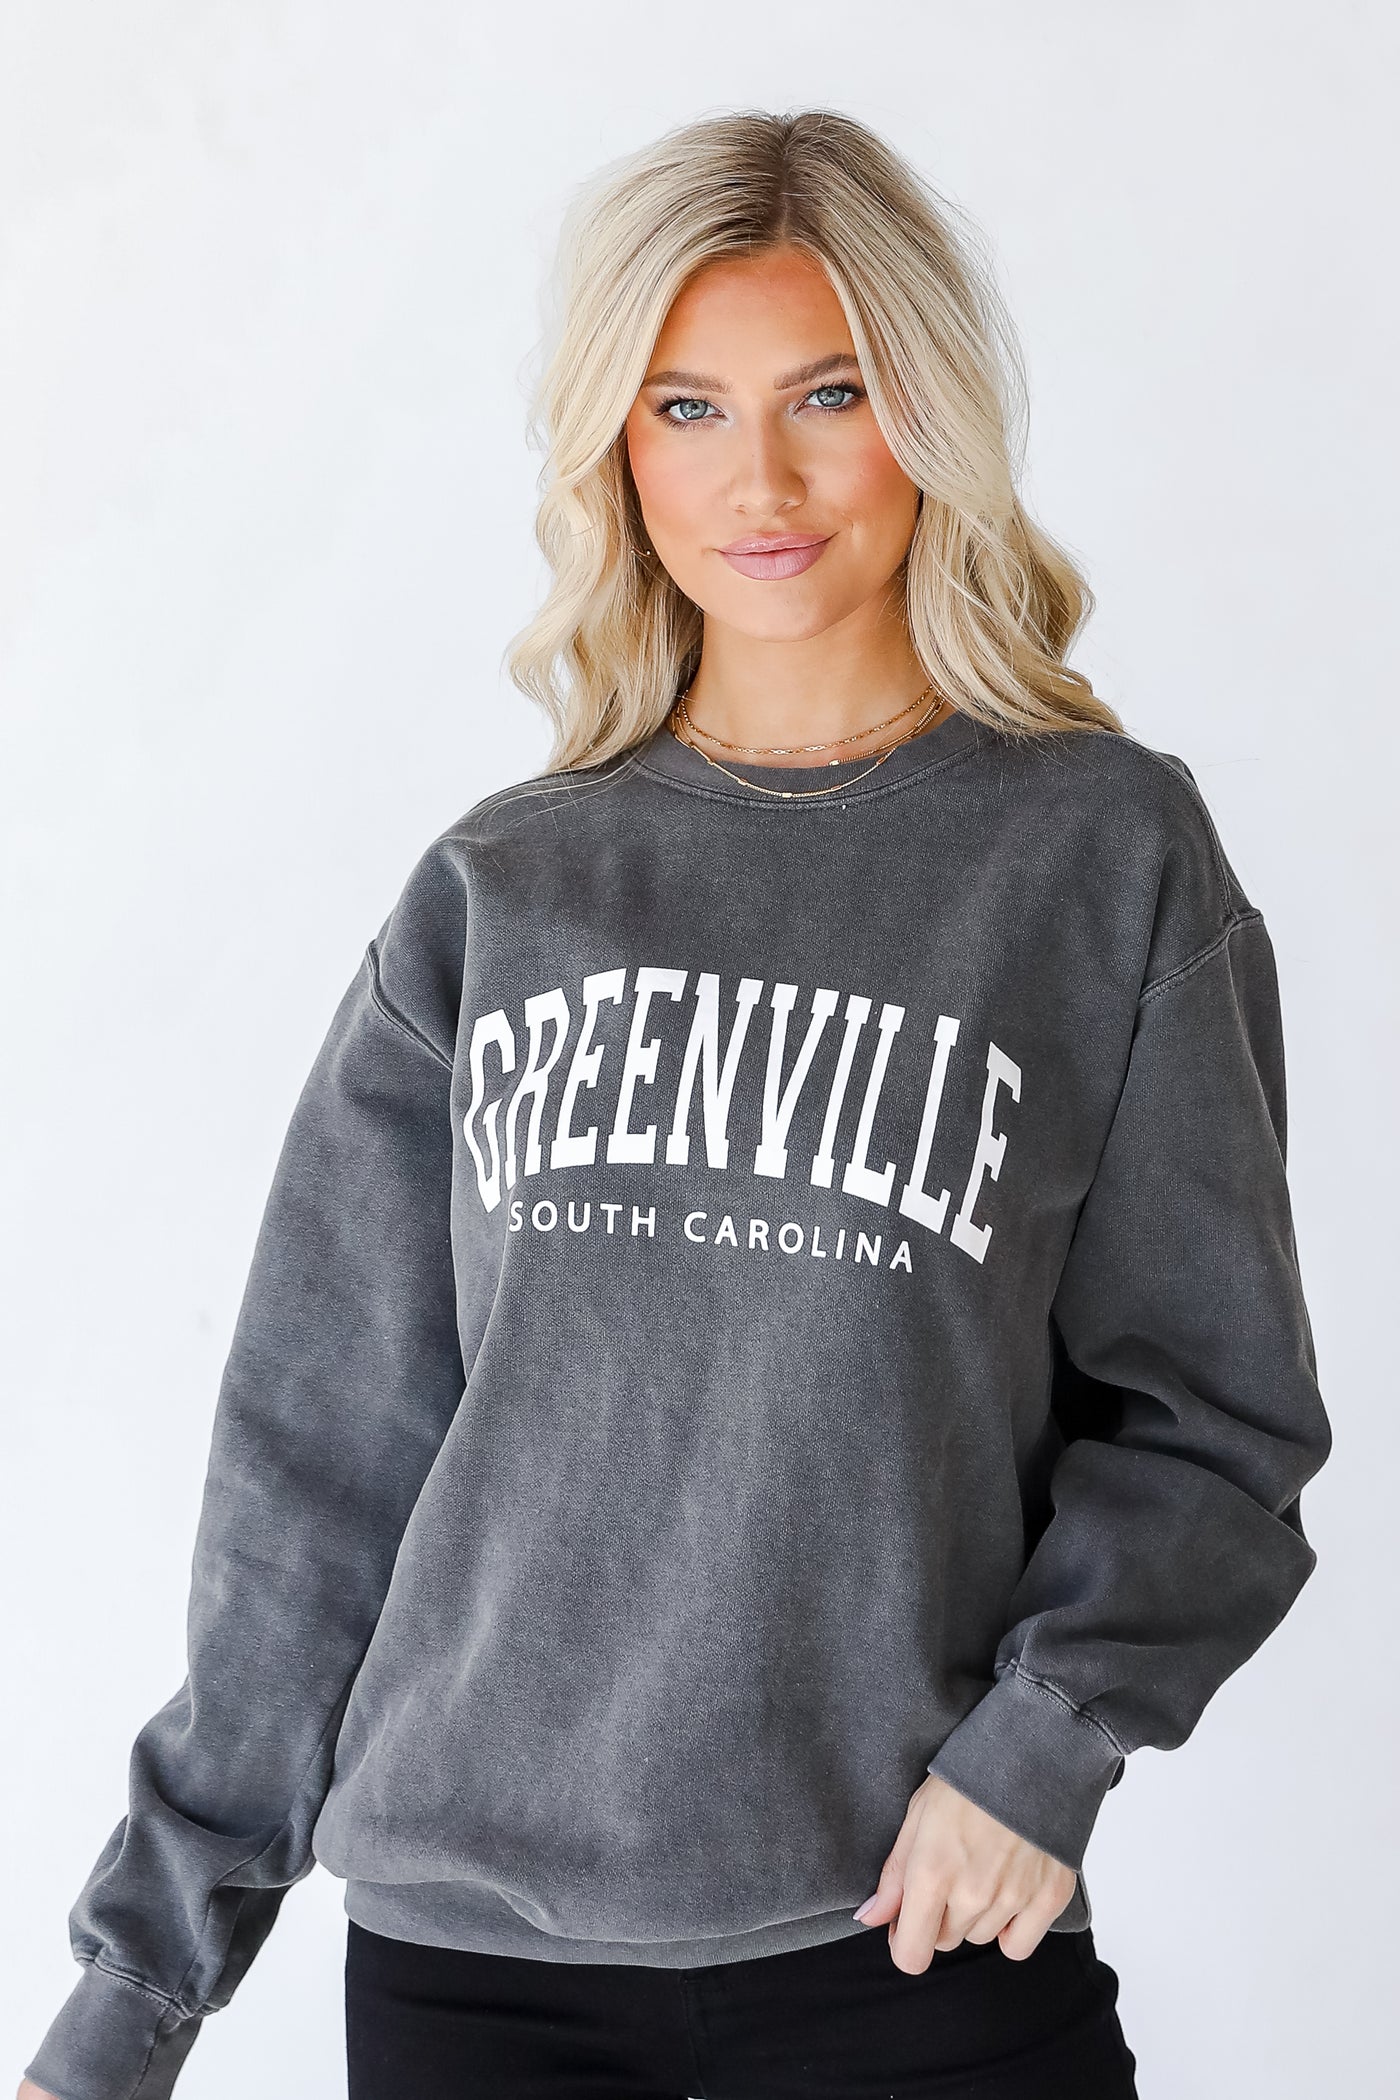 Greenville South Carolina Pullover front view